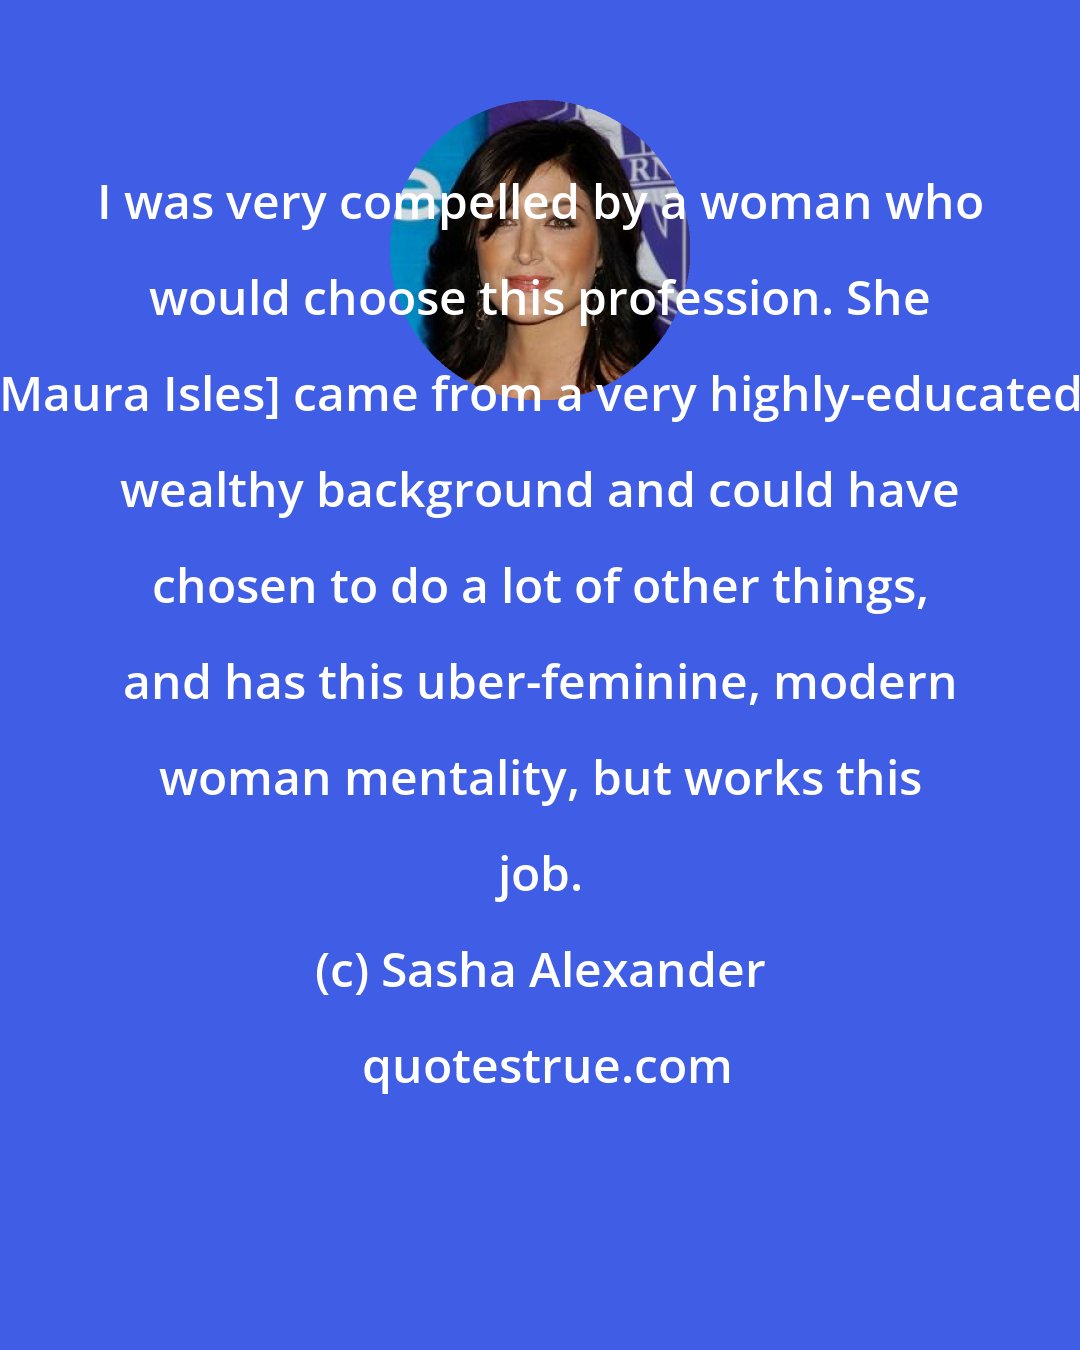 Sasha Alexander: I was very compelled by a woman who would choose this profession. She [Maura Isles] came from a very highly-educated, wealthy background and could have chosen to do a lot of other things, and has this uber-feminine, modern woman mentality, but works this job.